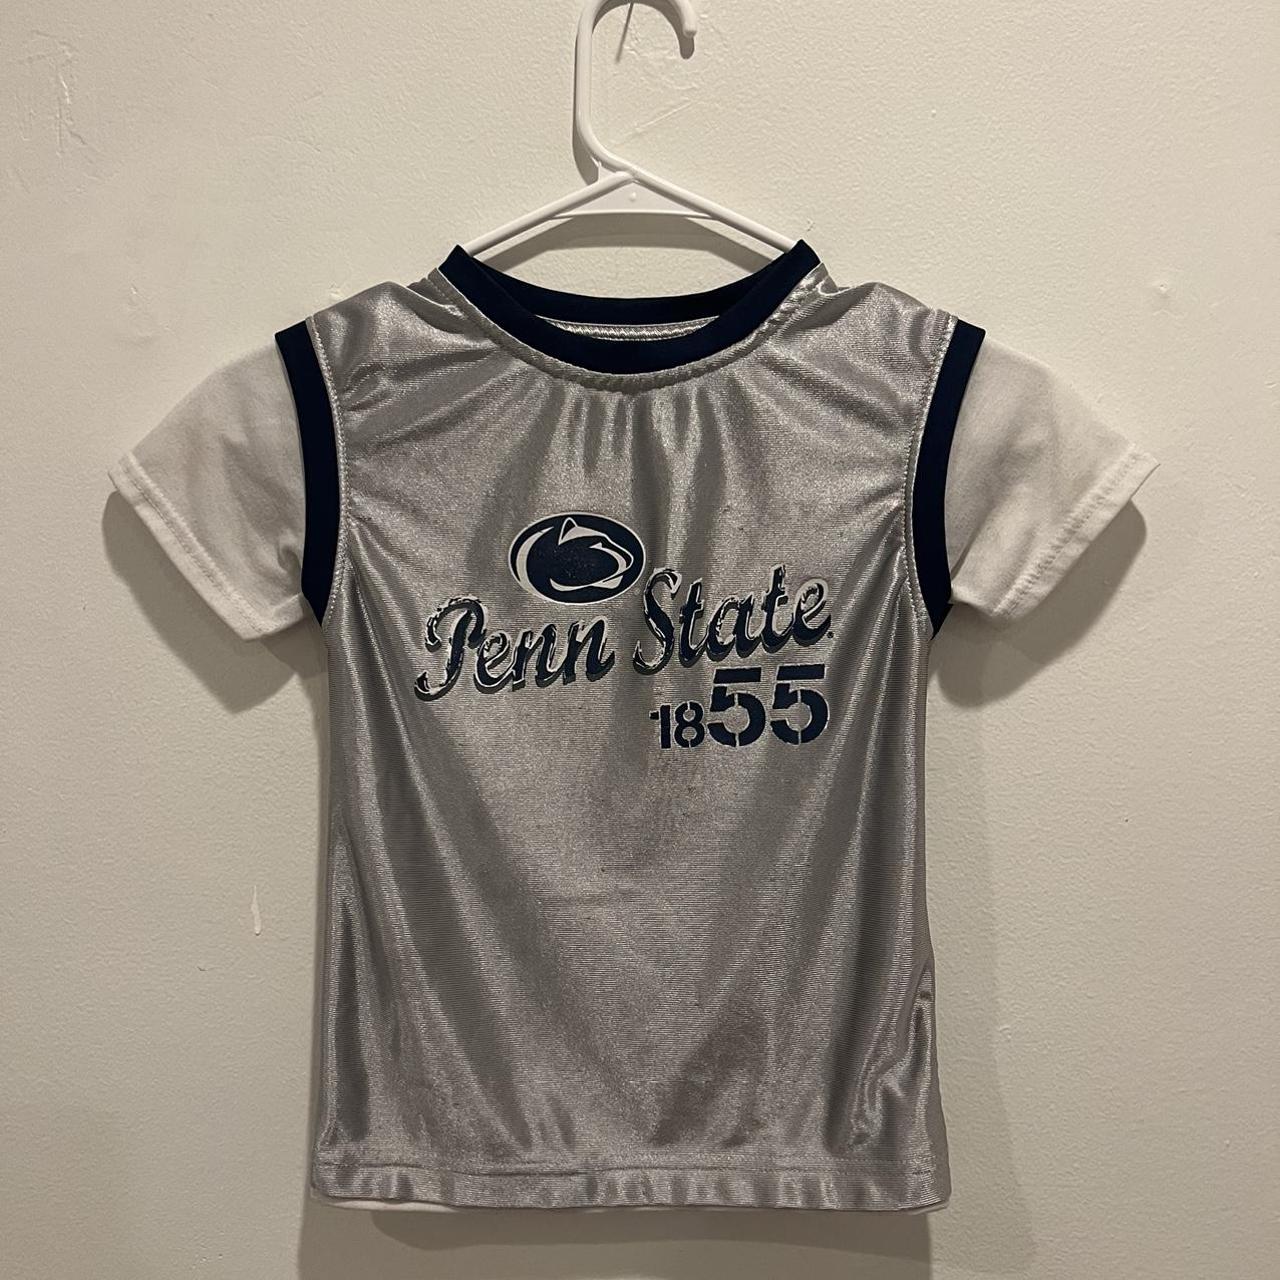 Penn State Youth Vintage Football T-shirt